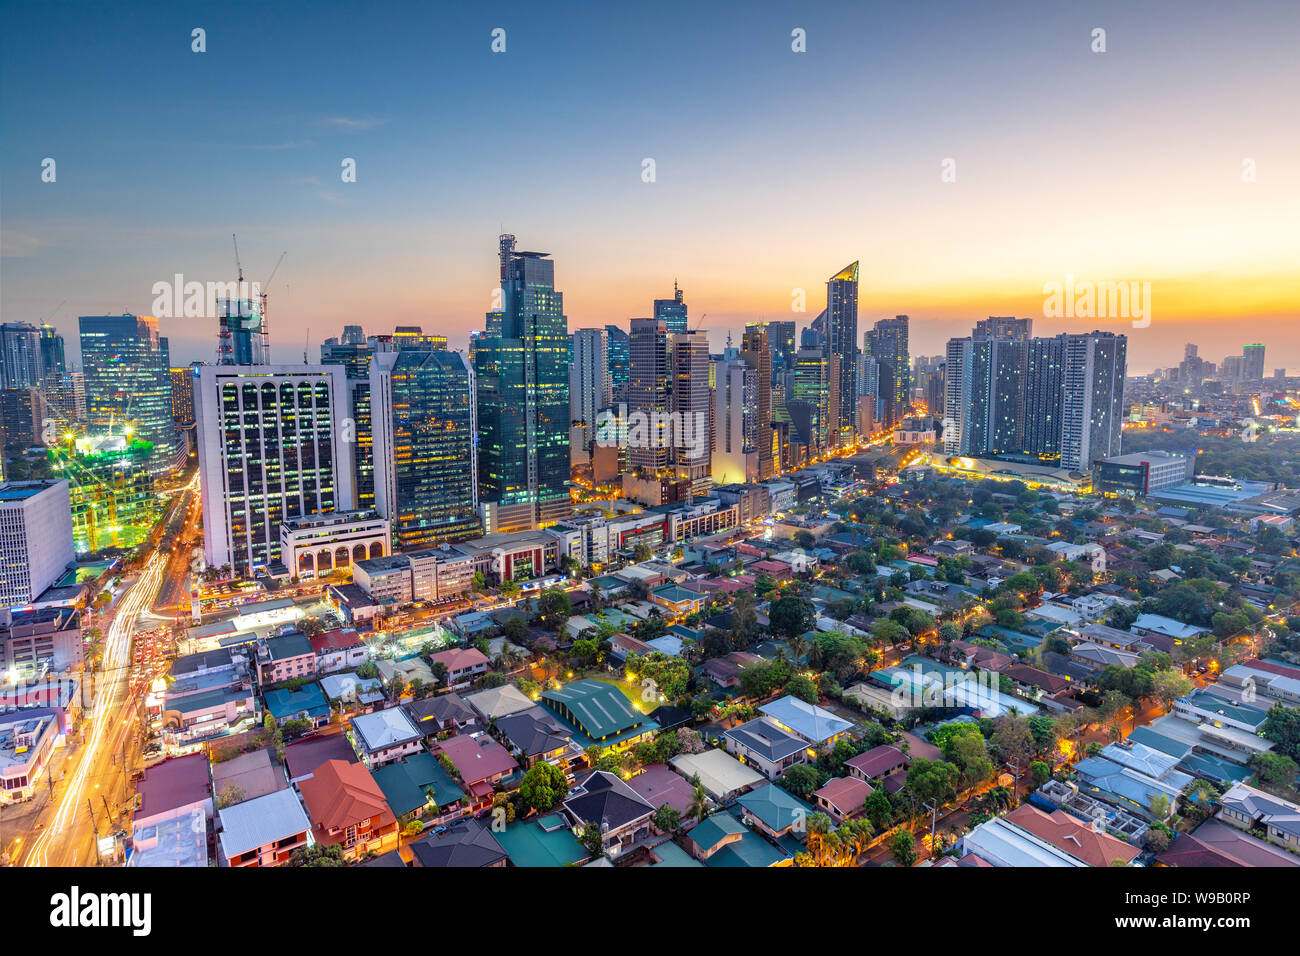 Eleveted, night view of Makati, the business district of Metro Manila,  Philippines Stock Photo